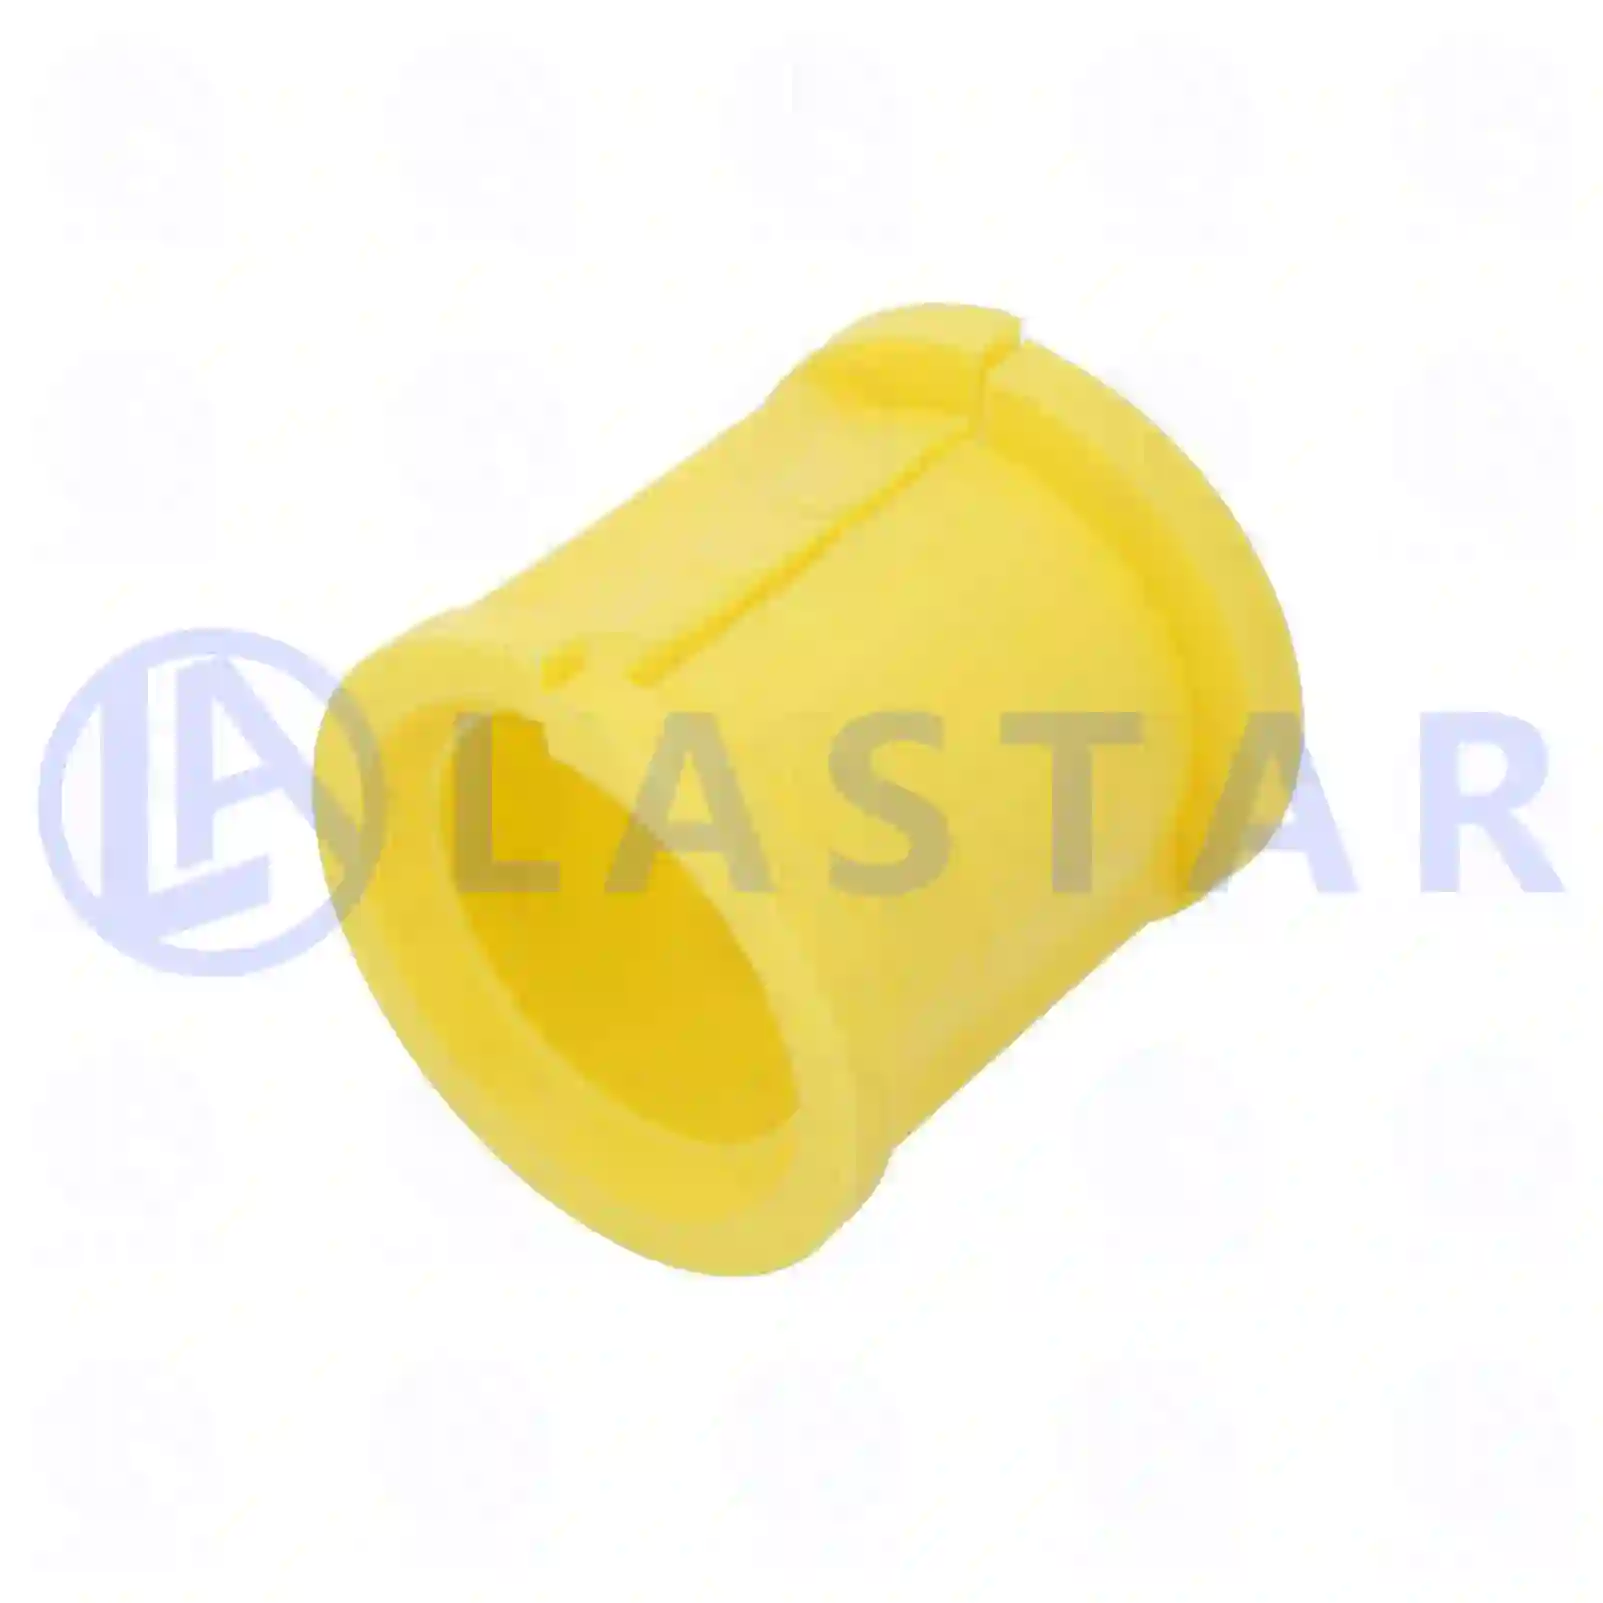 Bushing, stabilizer, yellow, 77729024, 1607561, 16075616, ZG41114-0008, ||  77729024 Lastar Spare Part | Truck Spare Parts, Auotomotive Spare Parts Bushing, stabilizer, yellow, 77729024, 1607561, 16075616, ZG41114-0008, ||  77729024 Lastar Spare Part | Truck Spare Parts, Auotomotive Spare Parts